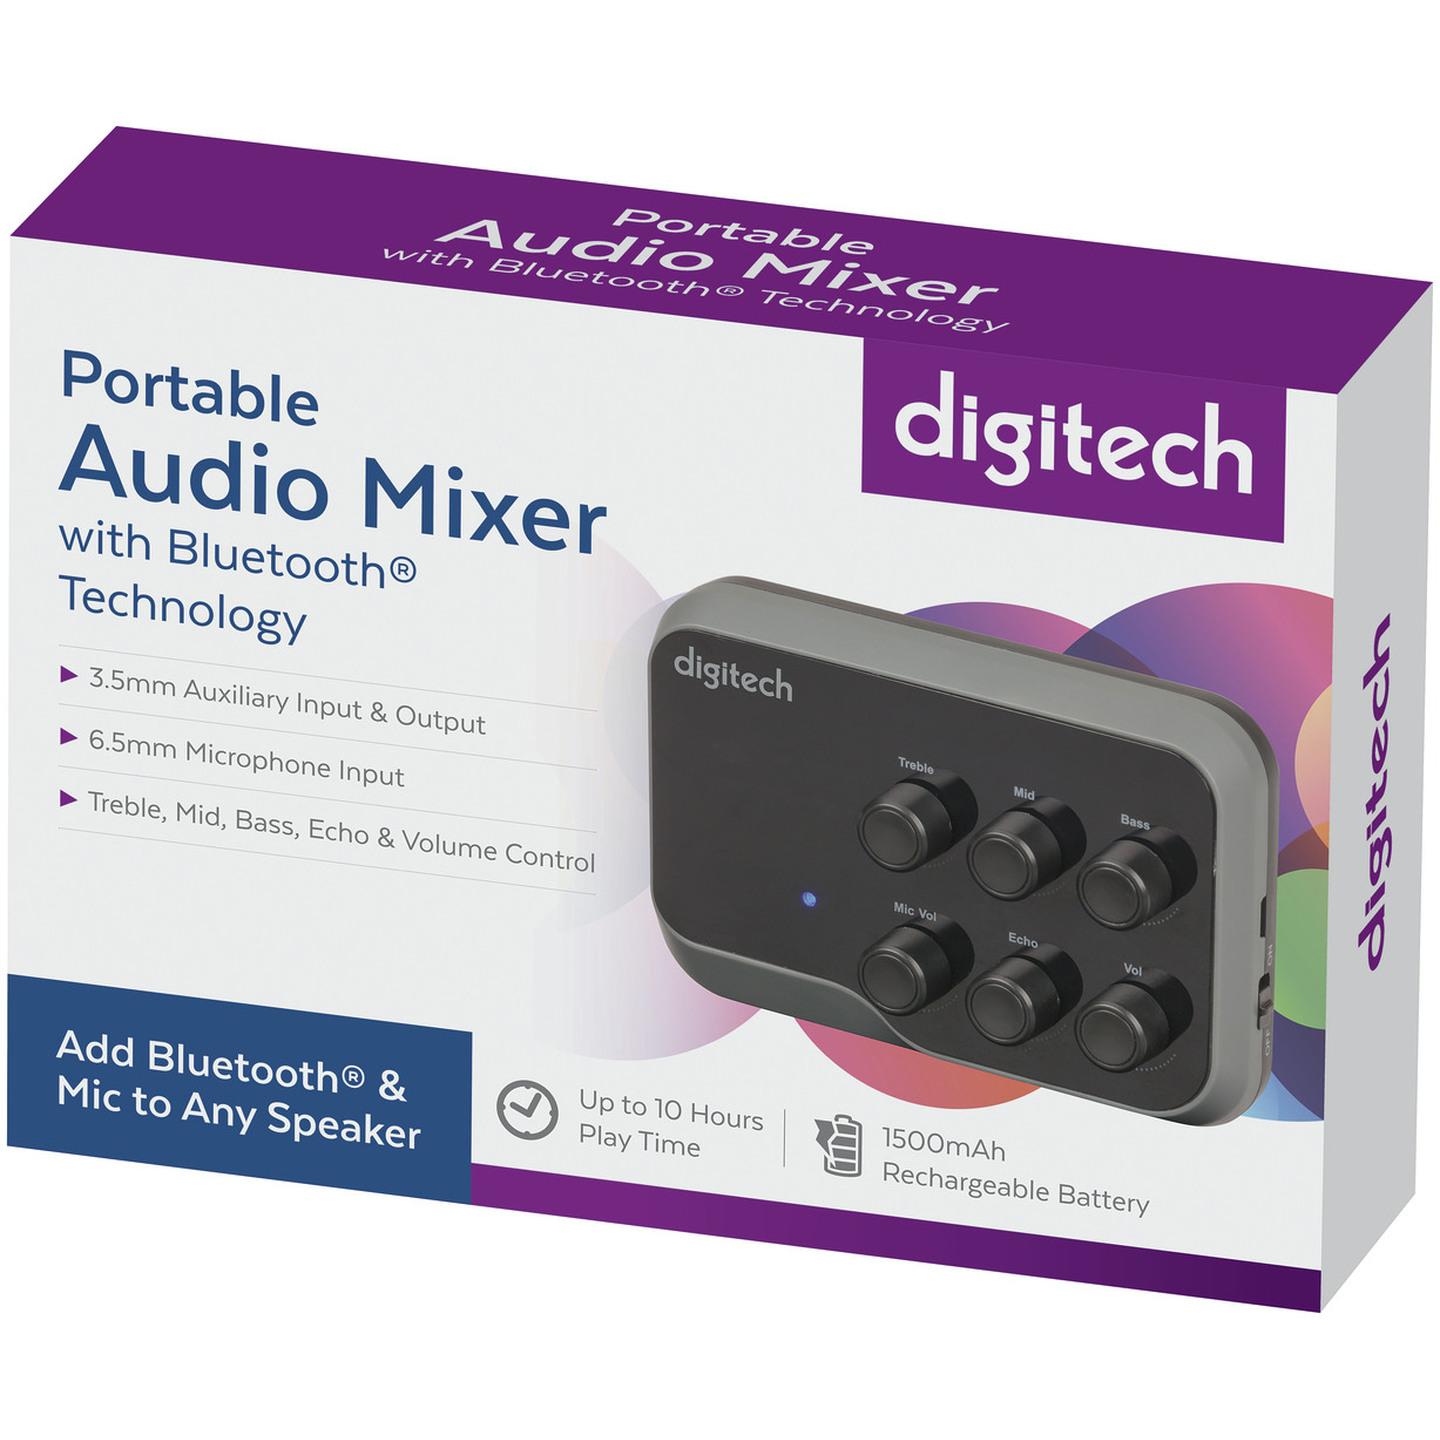 Audio Mixer with Bluetooth Technology